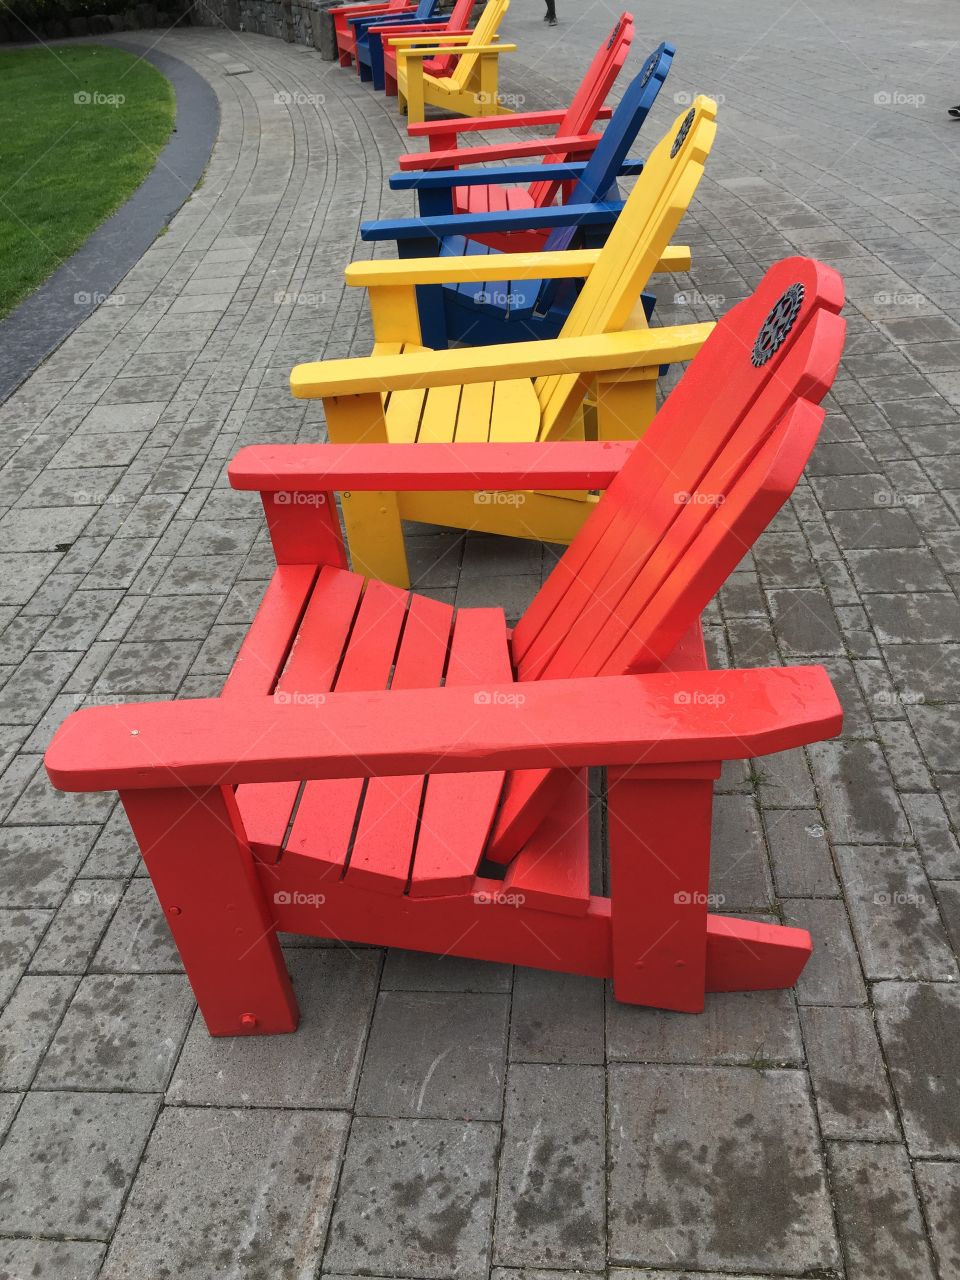 Colourful red, yellow and blue Adirondack chairs in Whistler, British Columbia